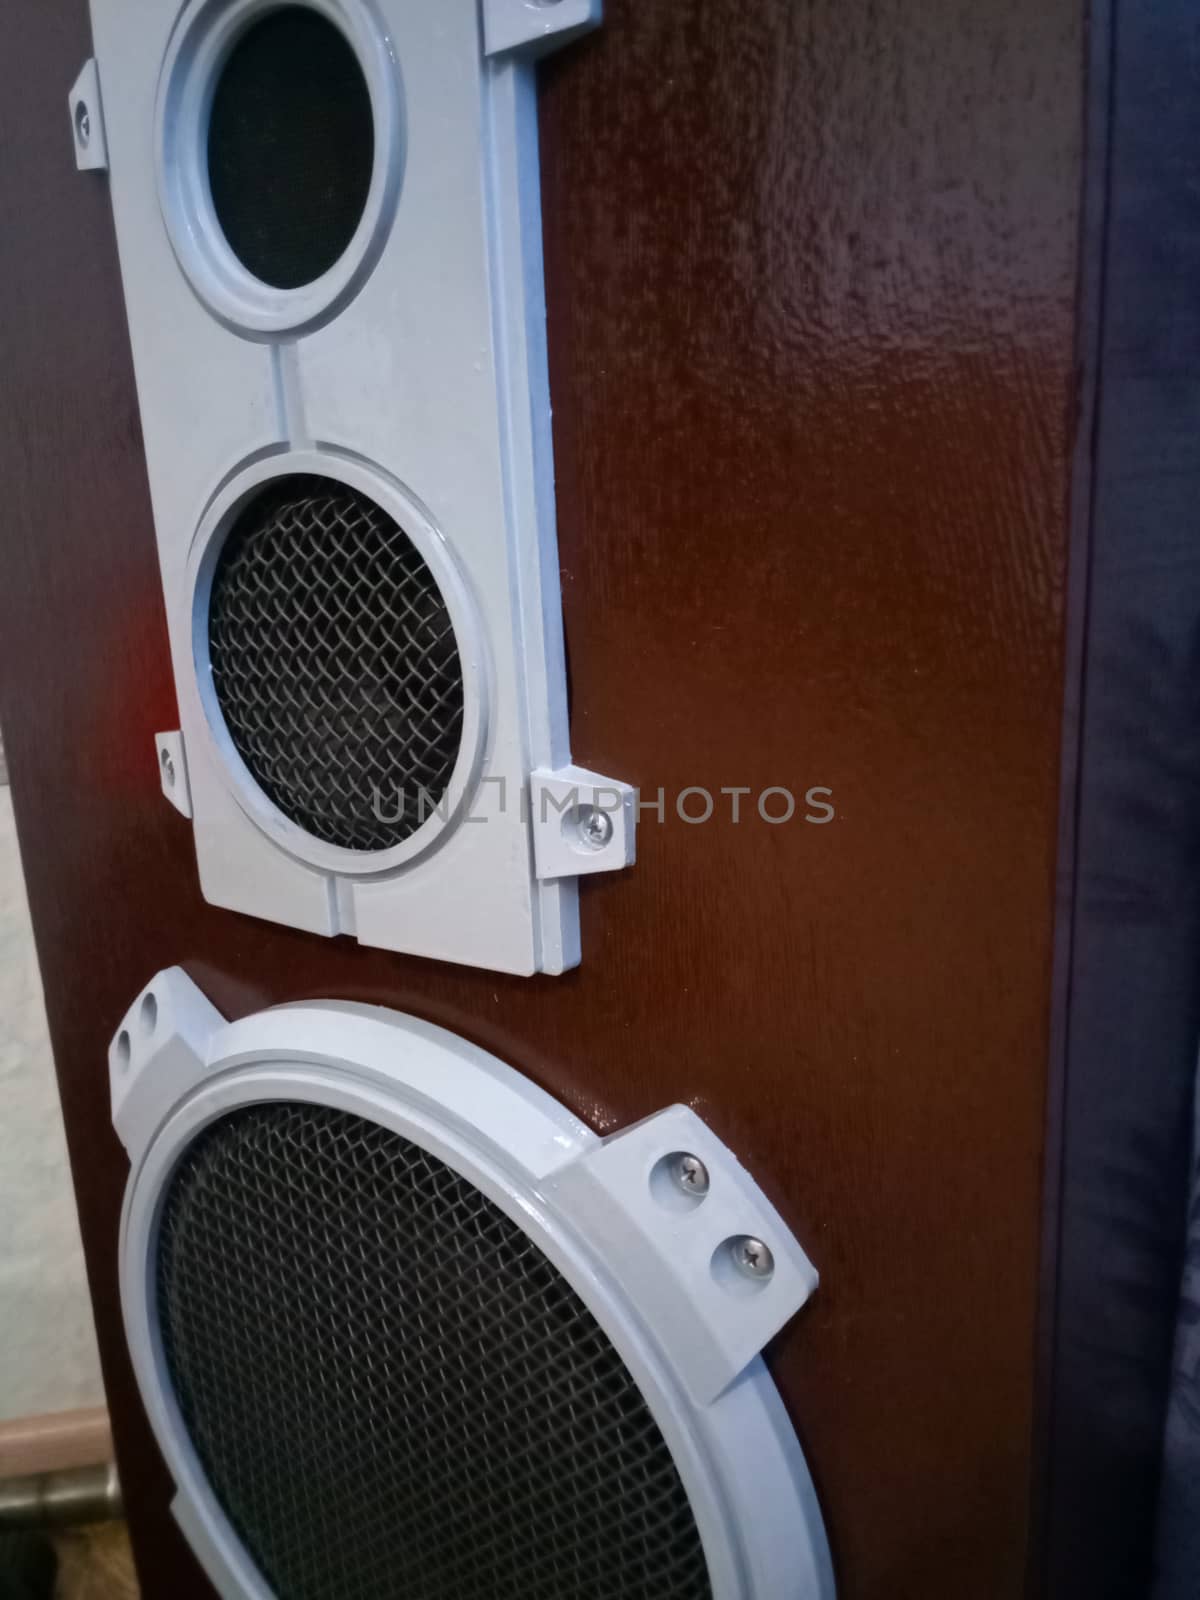 The restored and painted Amphiton 35as-018 speaker system. Soviet vintage powerful acoustics.